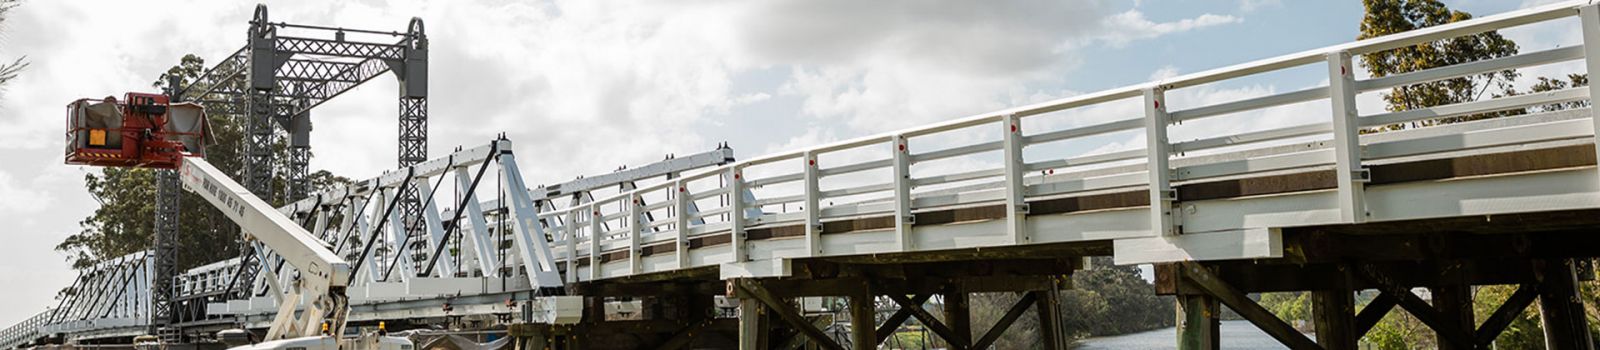 Image of a bridge being worked on by a cherry picker banner image